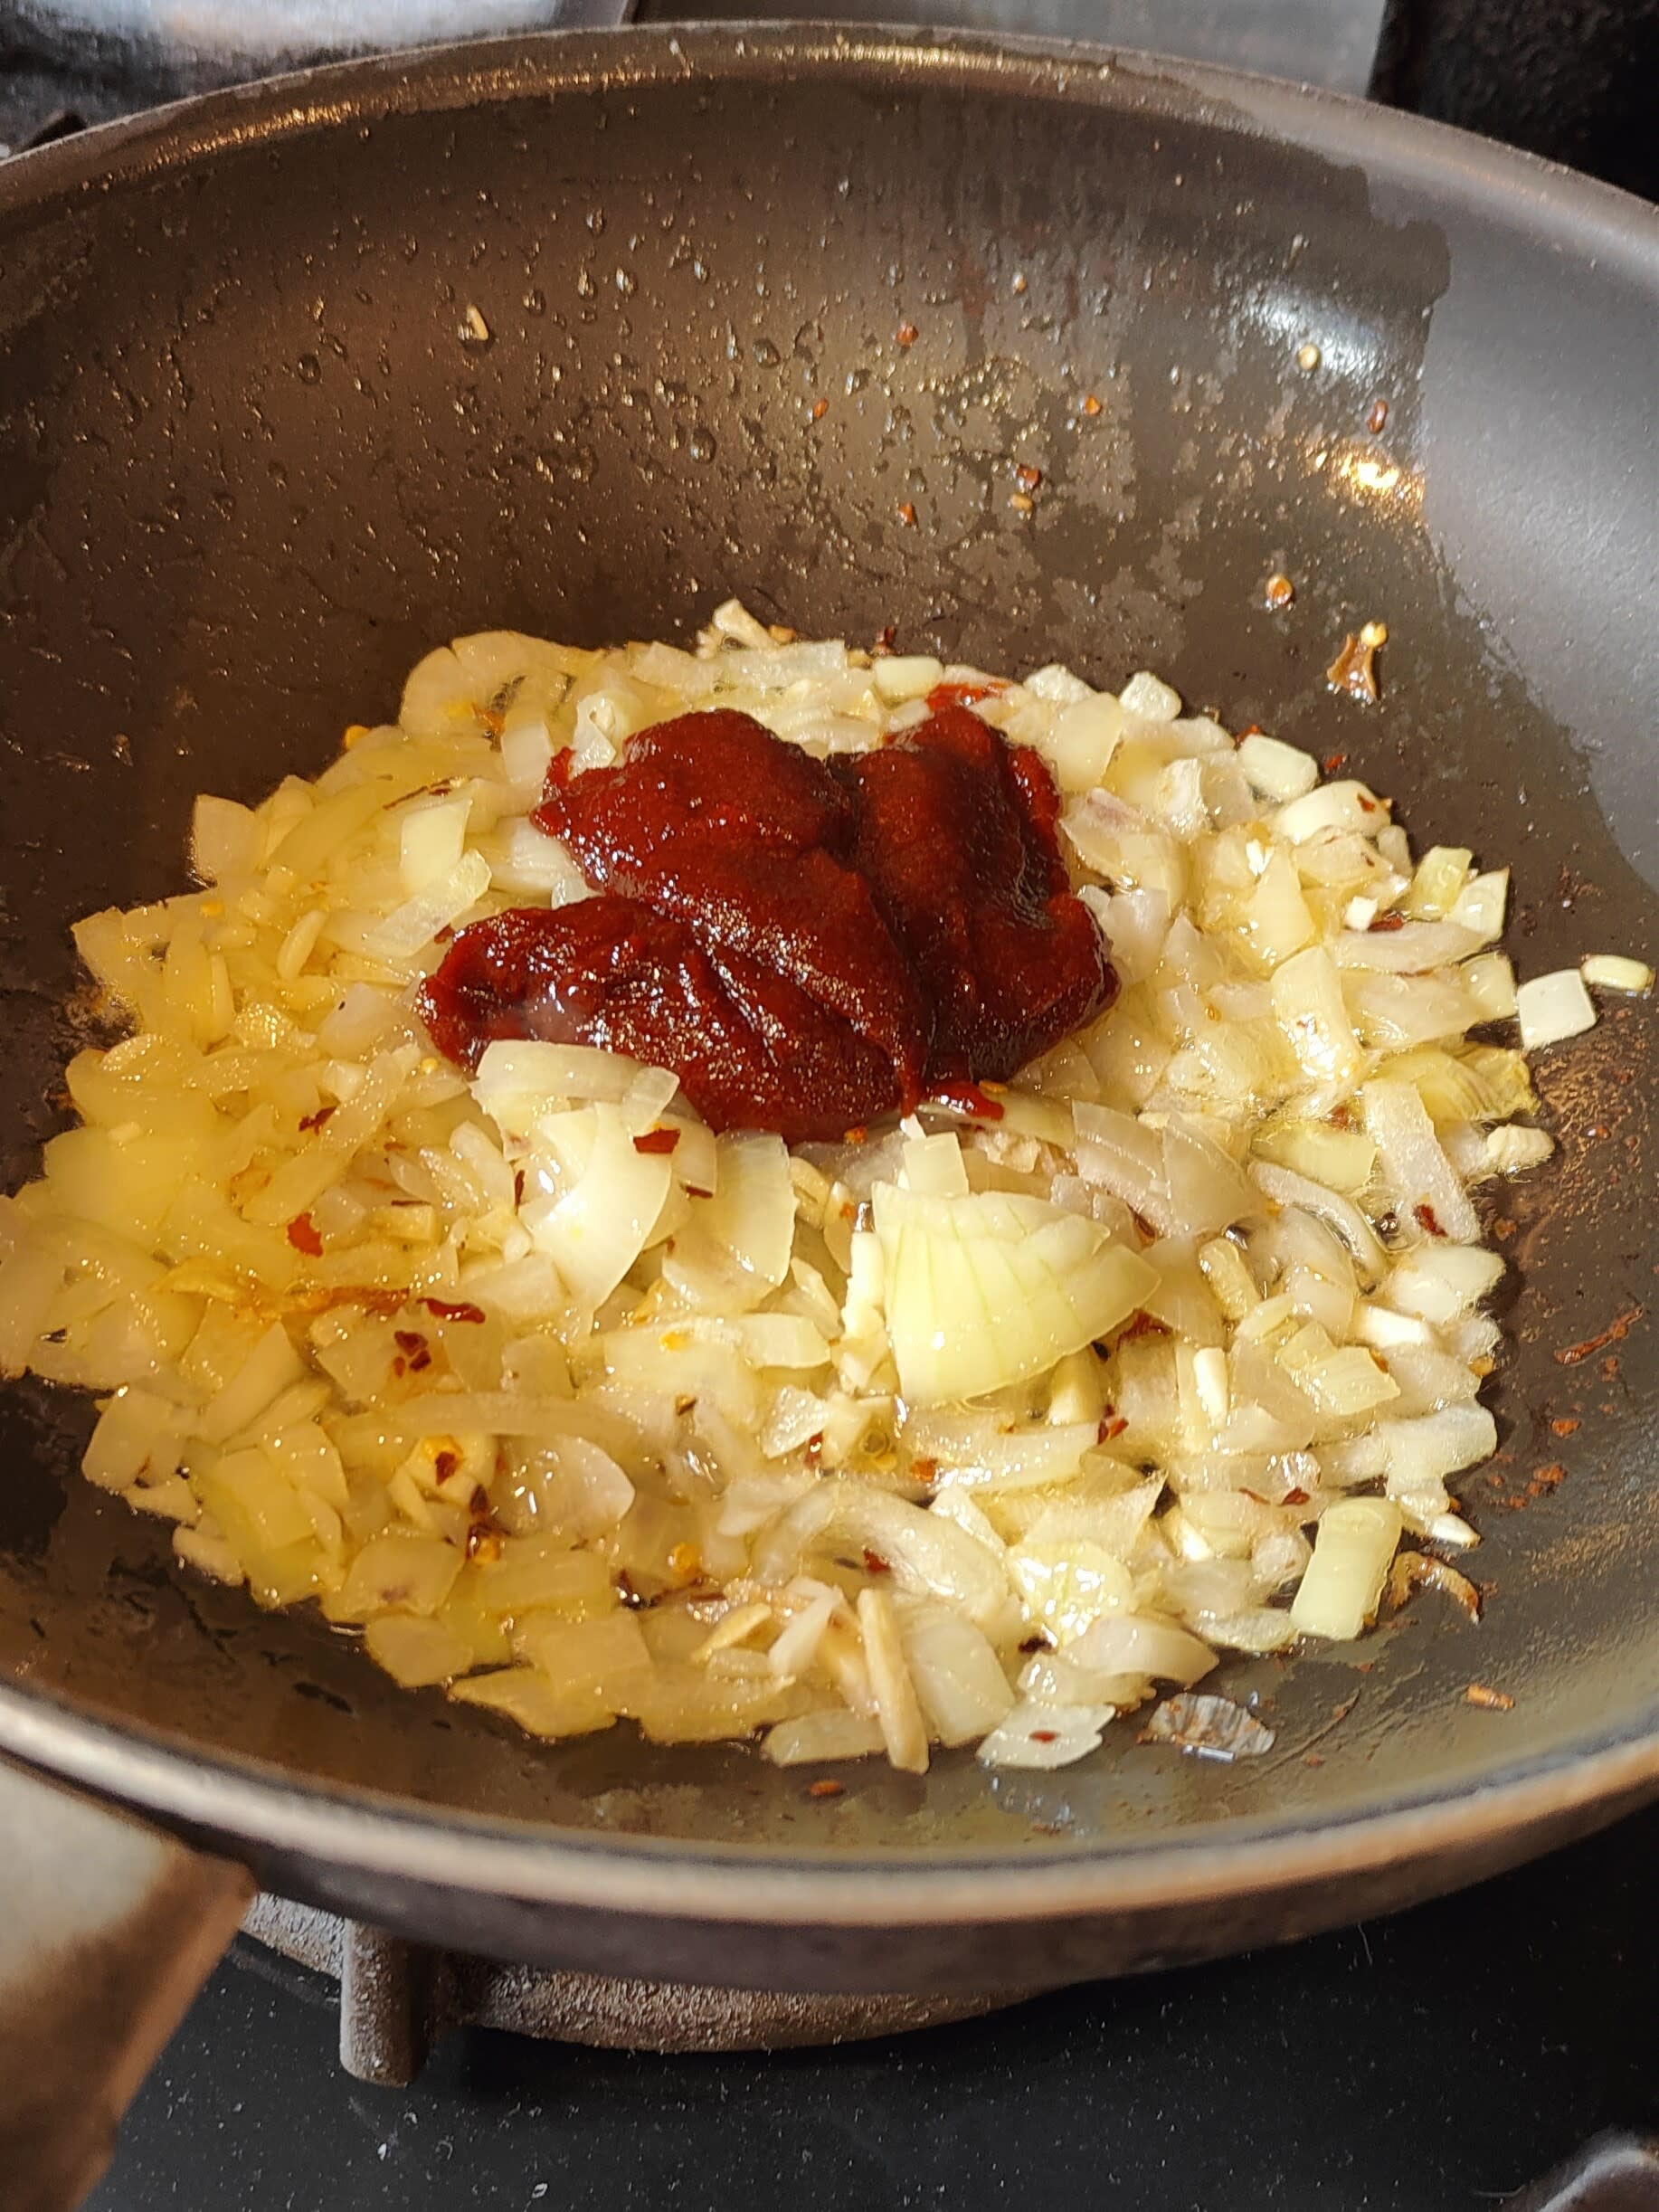 Fry up the onions and spices